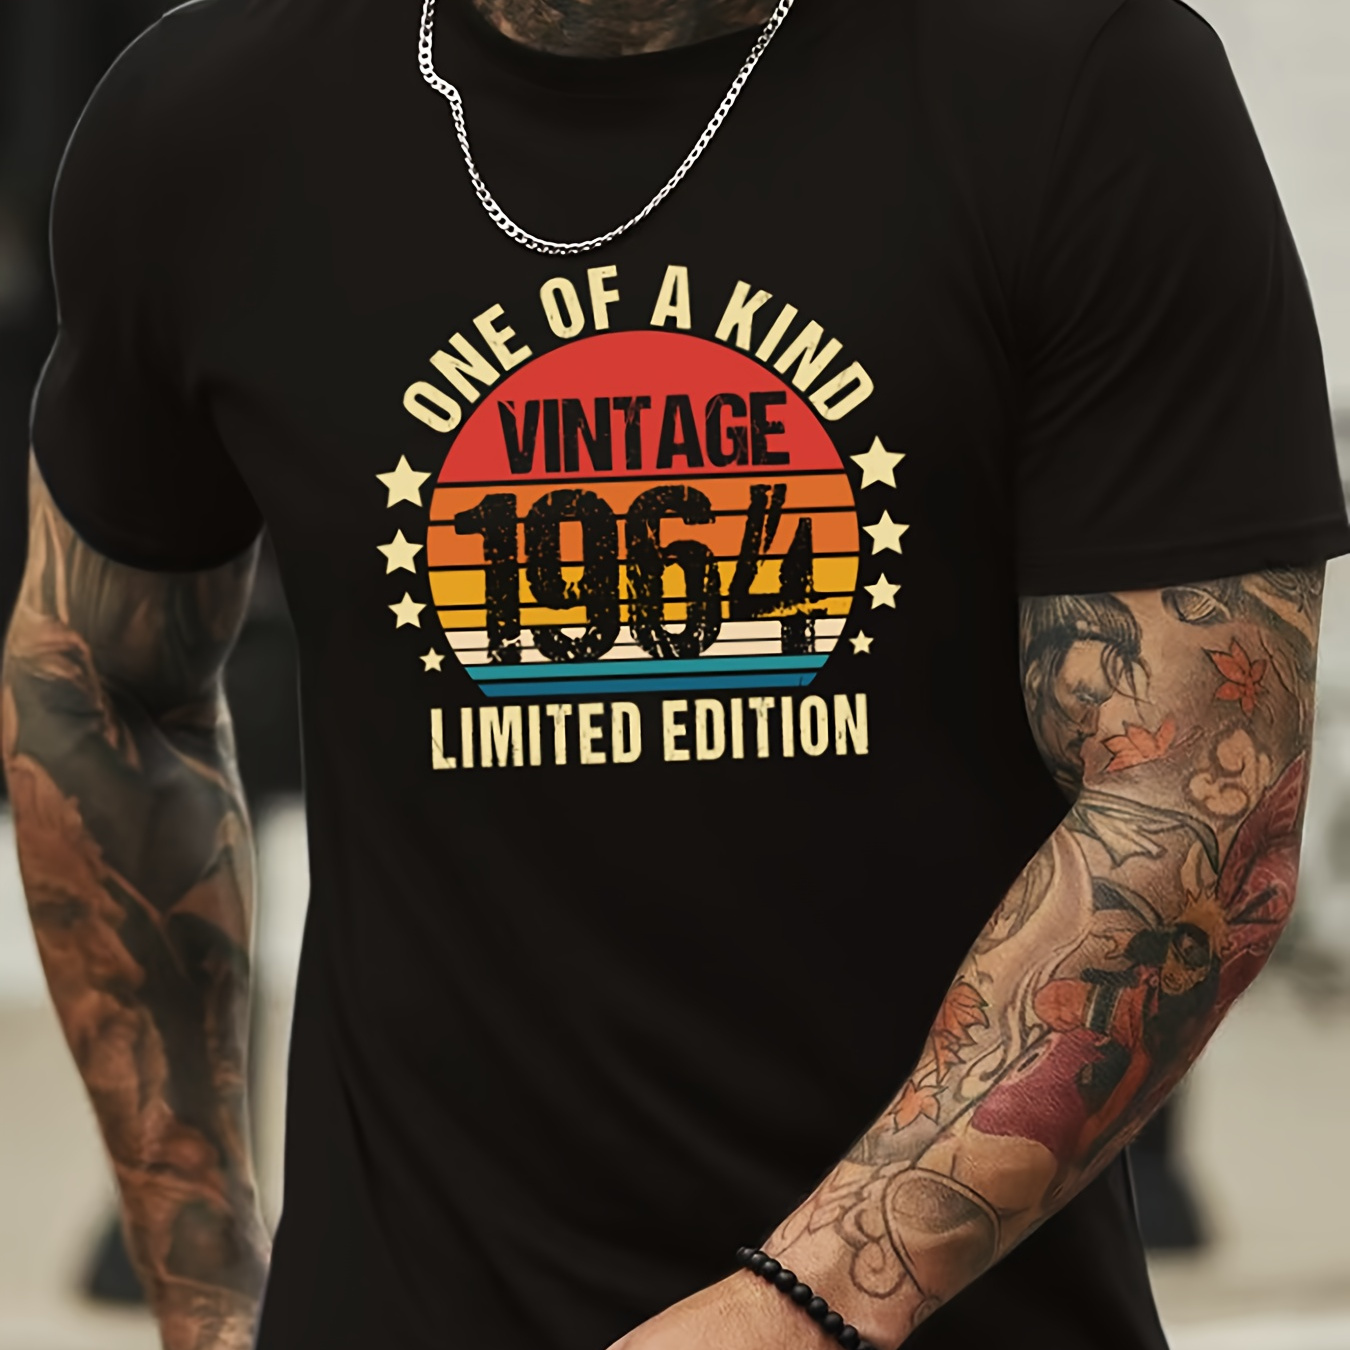 

1 Of A Kind Vintage 1964 Limited Edition Graphic Print, Men's Short Sleeve Crew Neck T-shirts, Slim Fit Shirt For Exercise